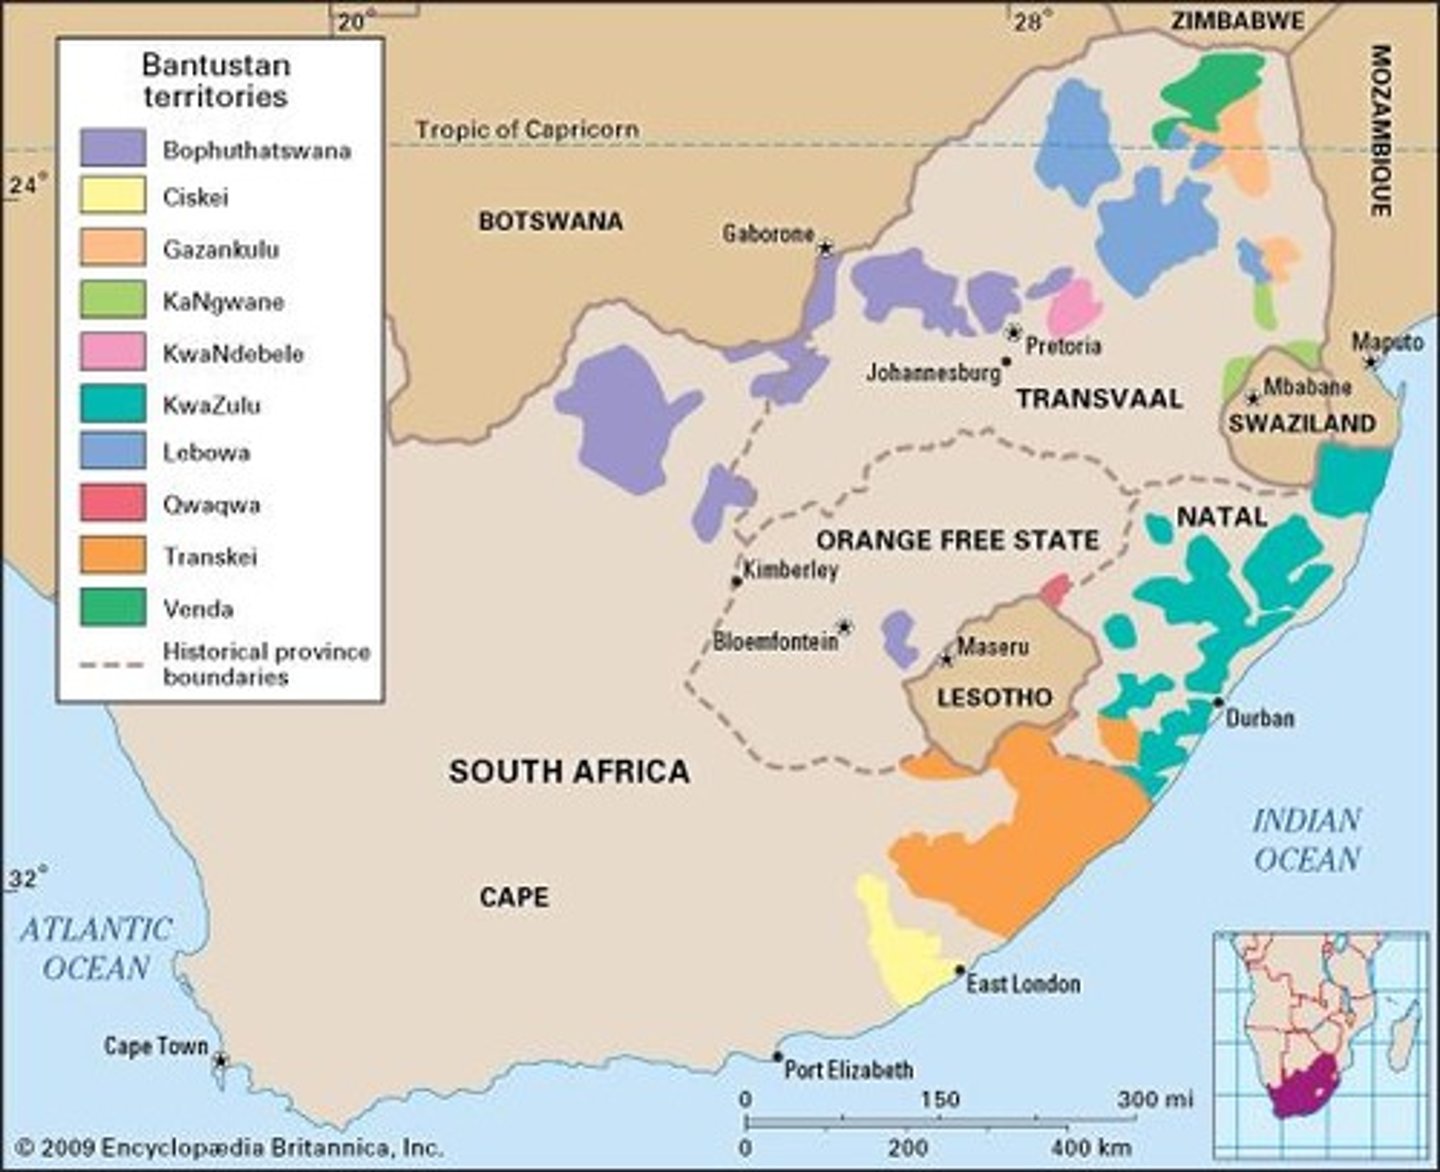 <p>also known as "homelands" system, apartheid policy where black inhabitants were forced to live on territories set aside by government (part of grand apartheid)</p>